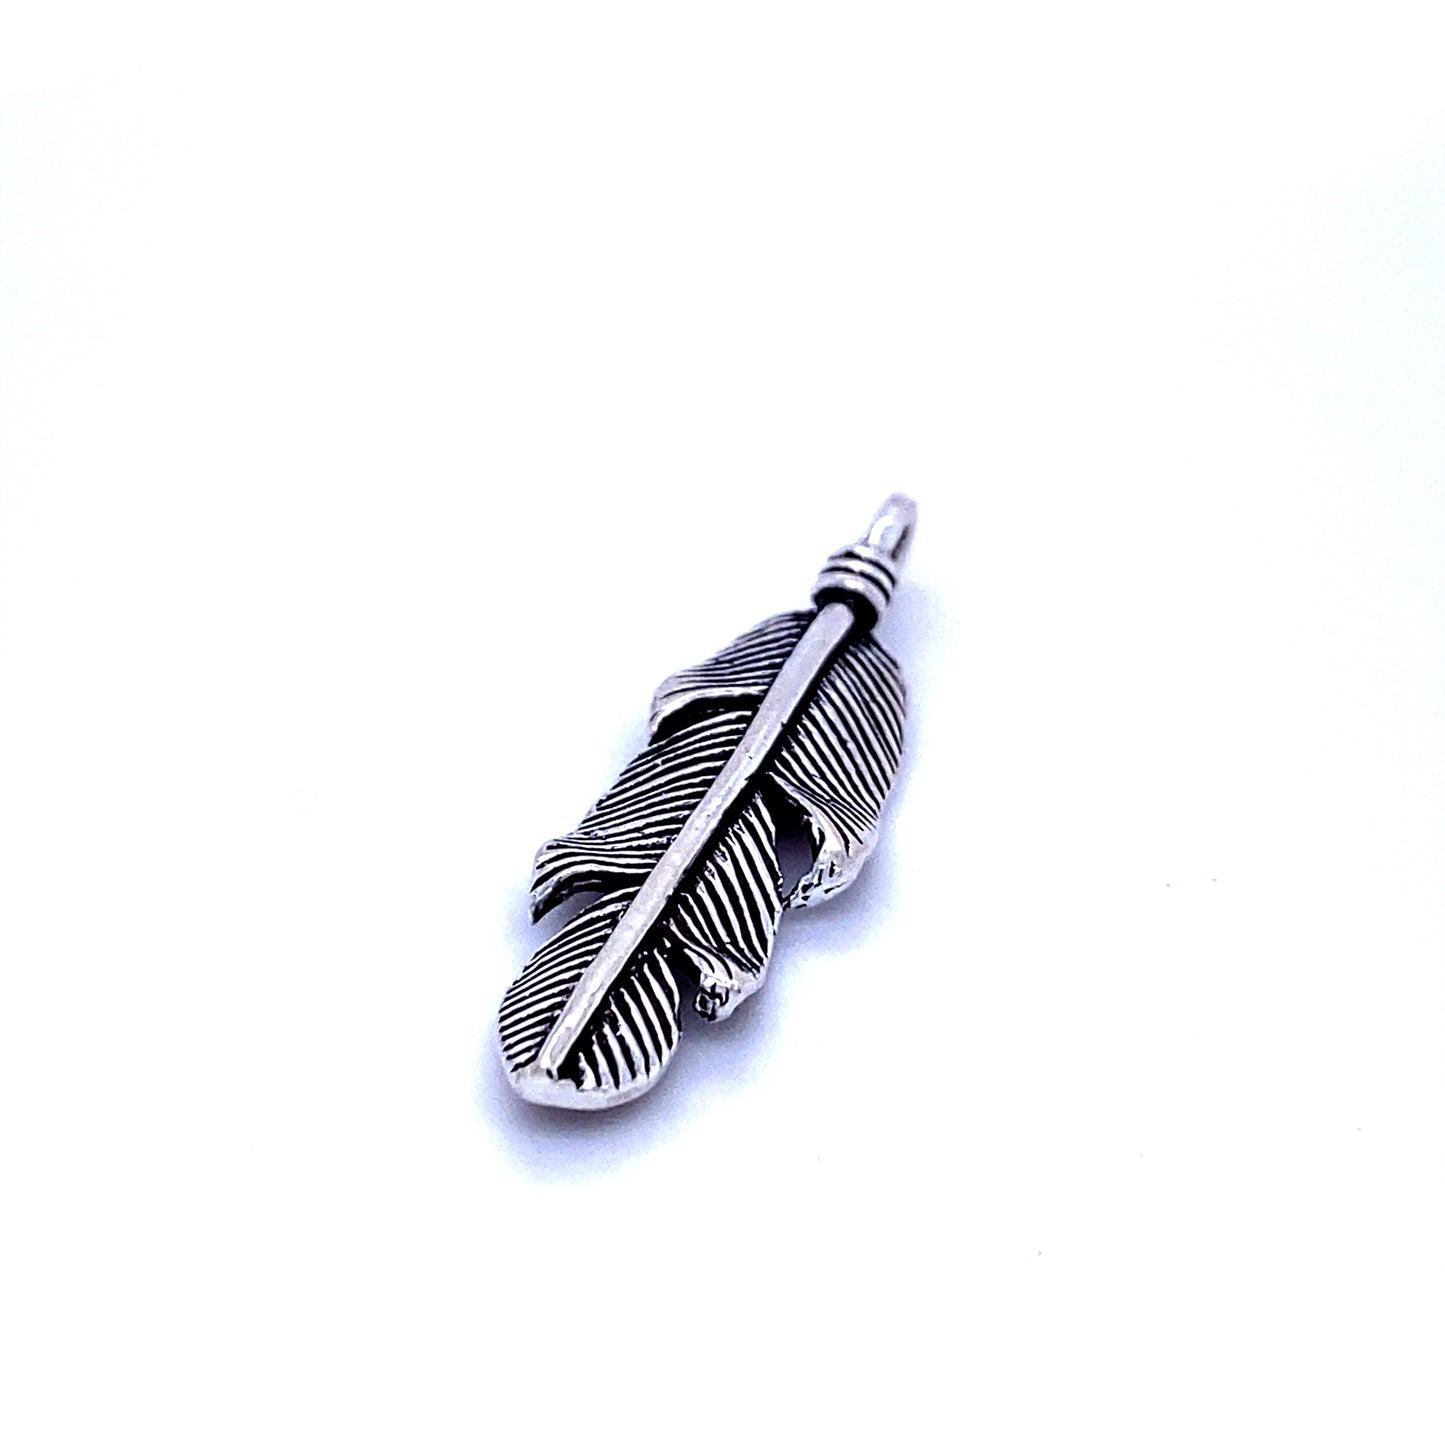 A Super Silver rustic design silver feather pendant on a white background.